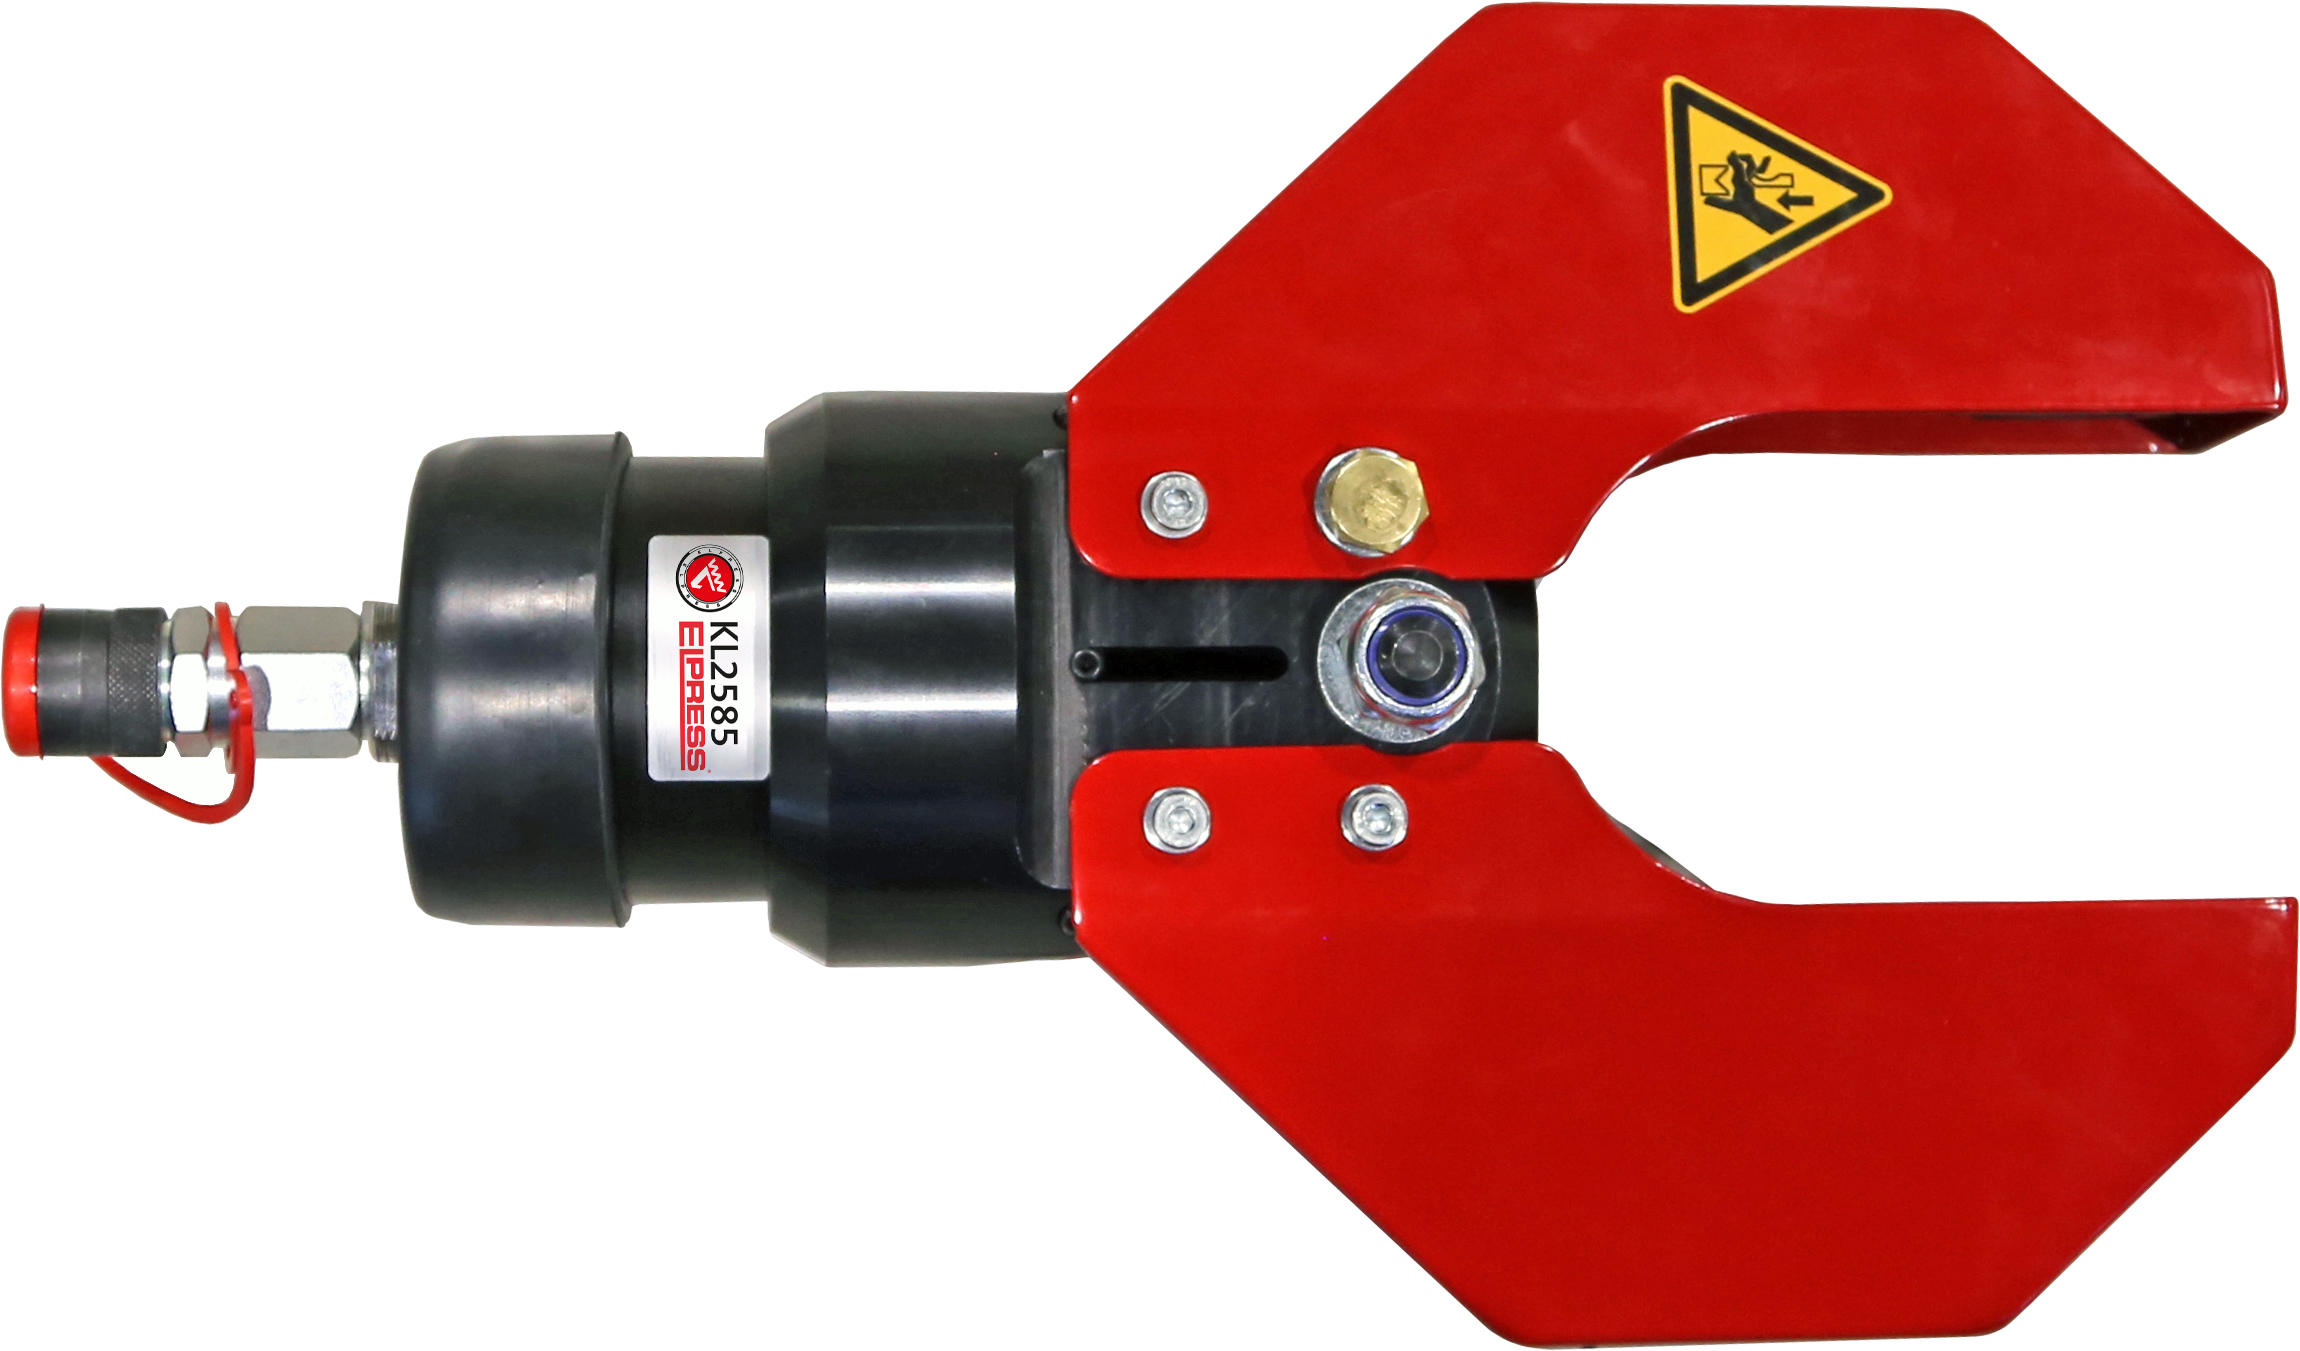 Hydraulic cable cutters